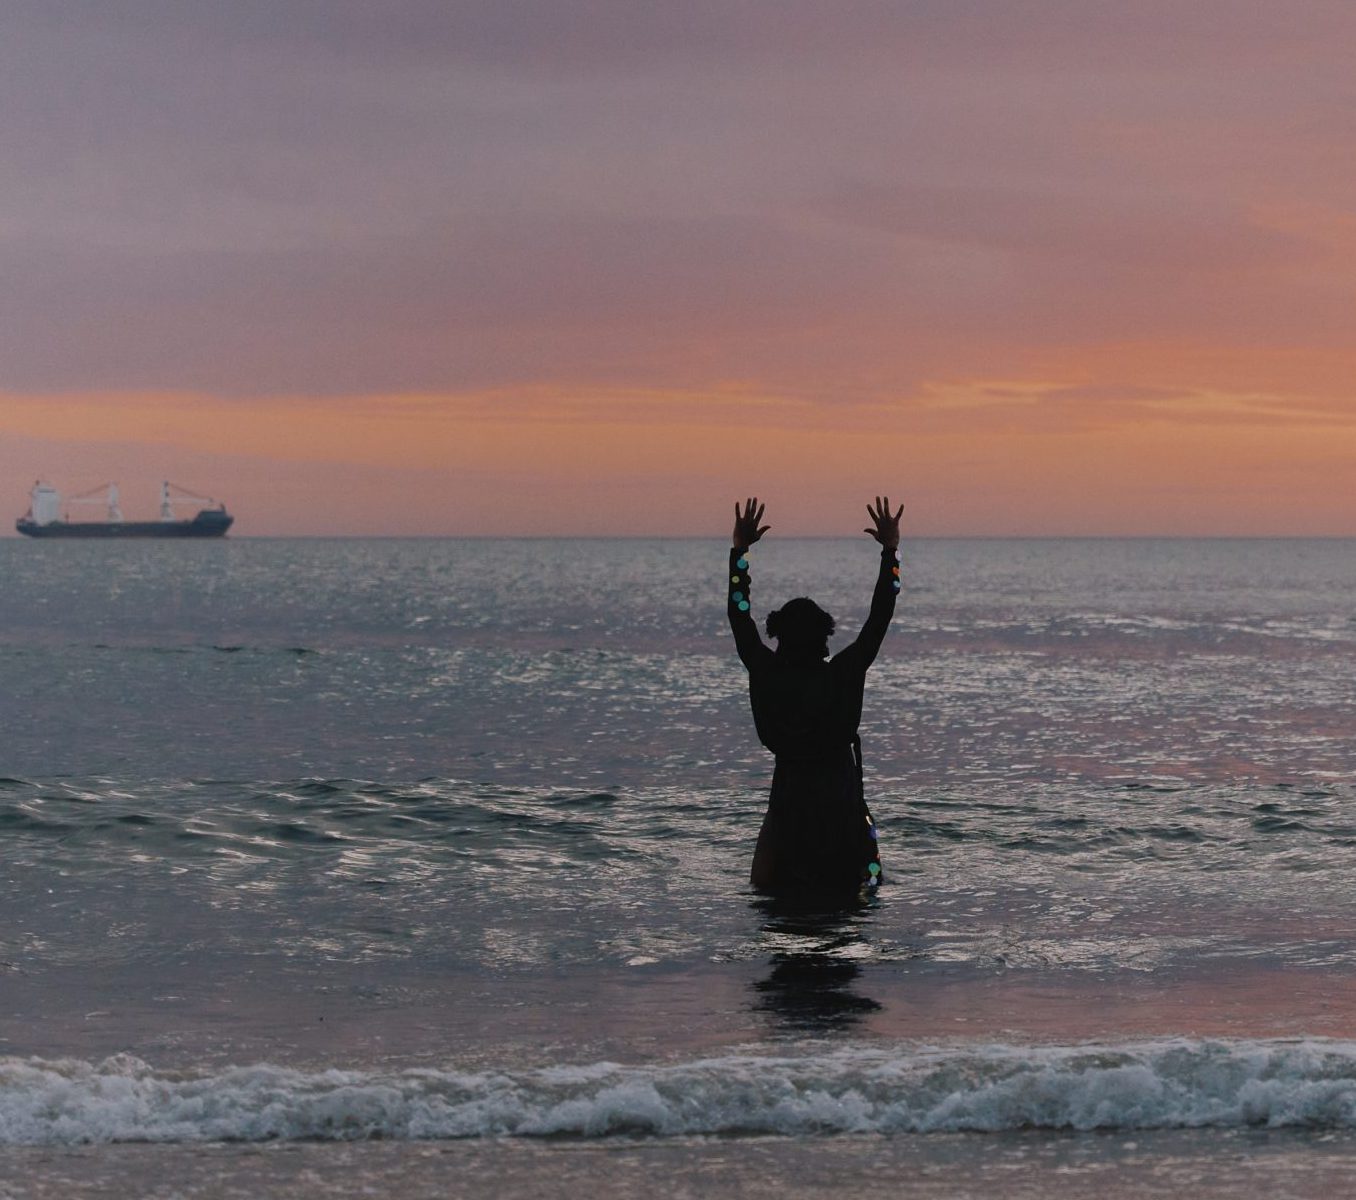 Amari standing knee deep in the ocean with his hands raised facing the sunset.